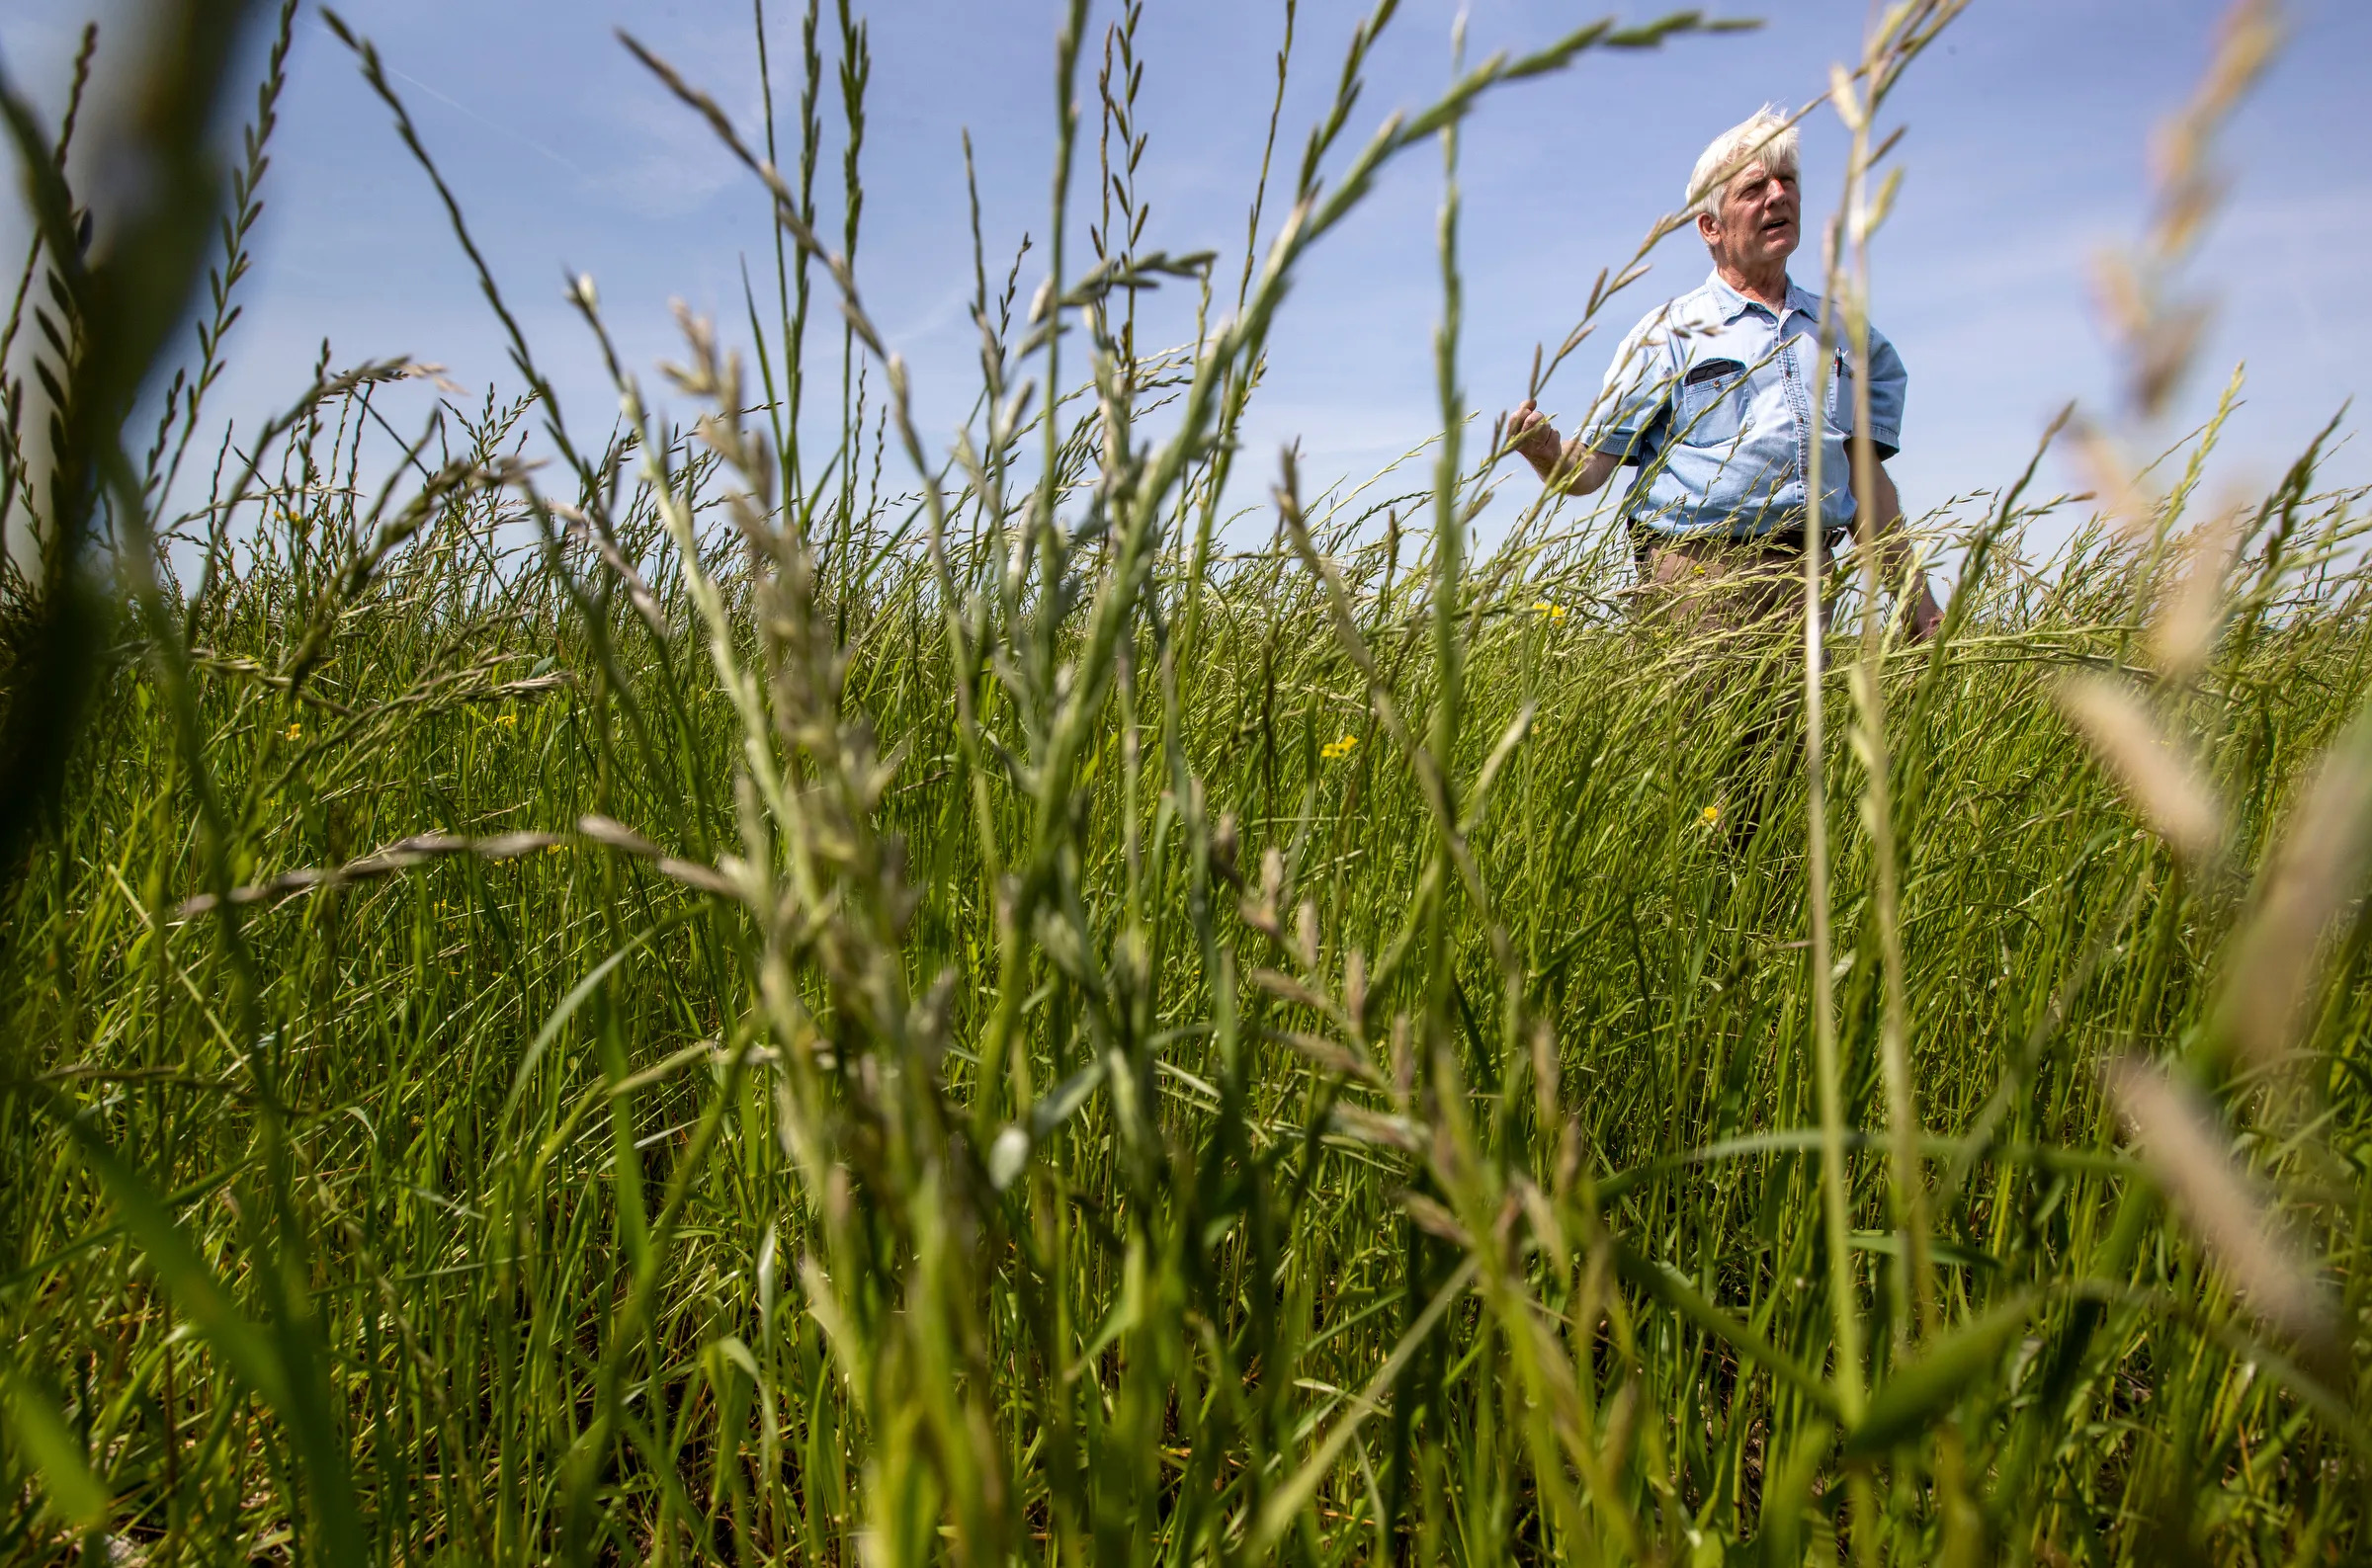 A wetter world is changing Midwest farming. Can growers adapt?